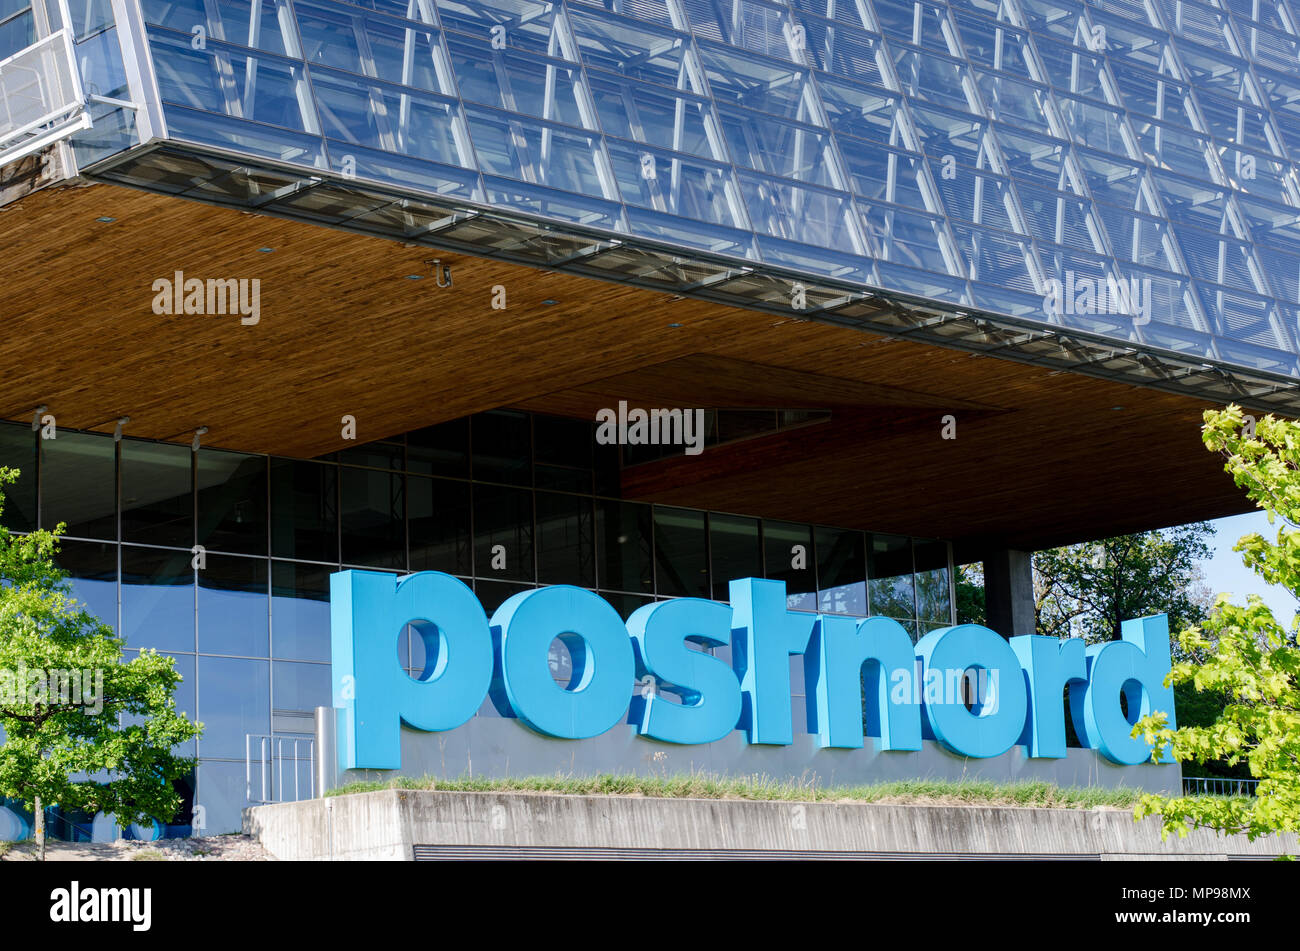 Solna, Sweden - 19 may 2018. The headqurters of the postal service company Postnord called "Arken". Stock Photo